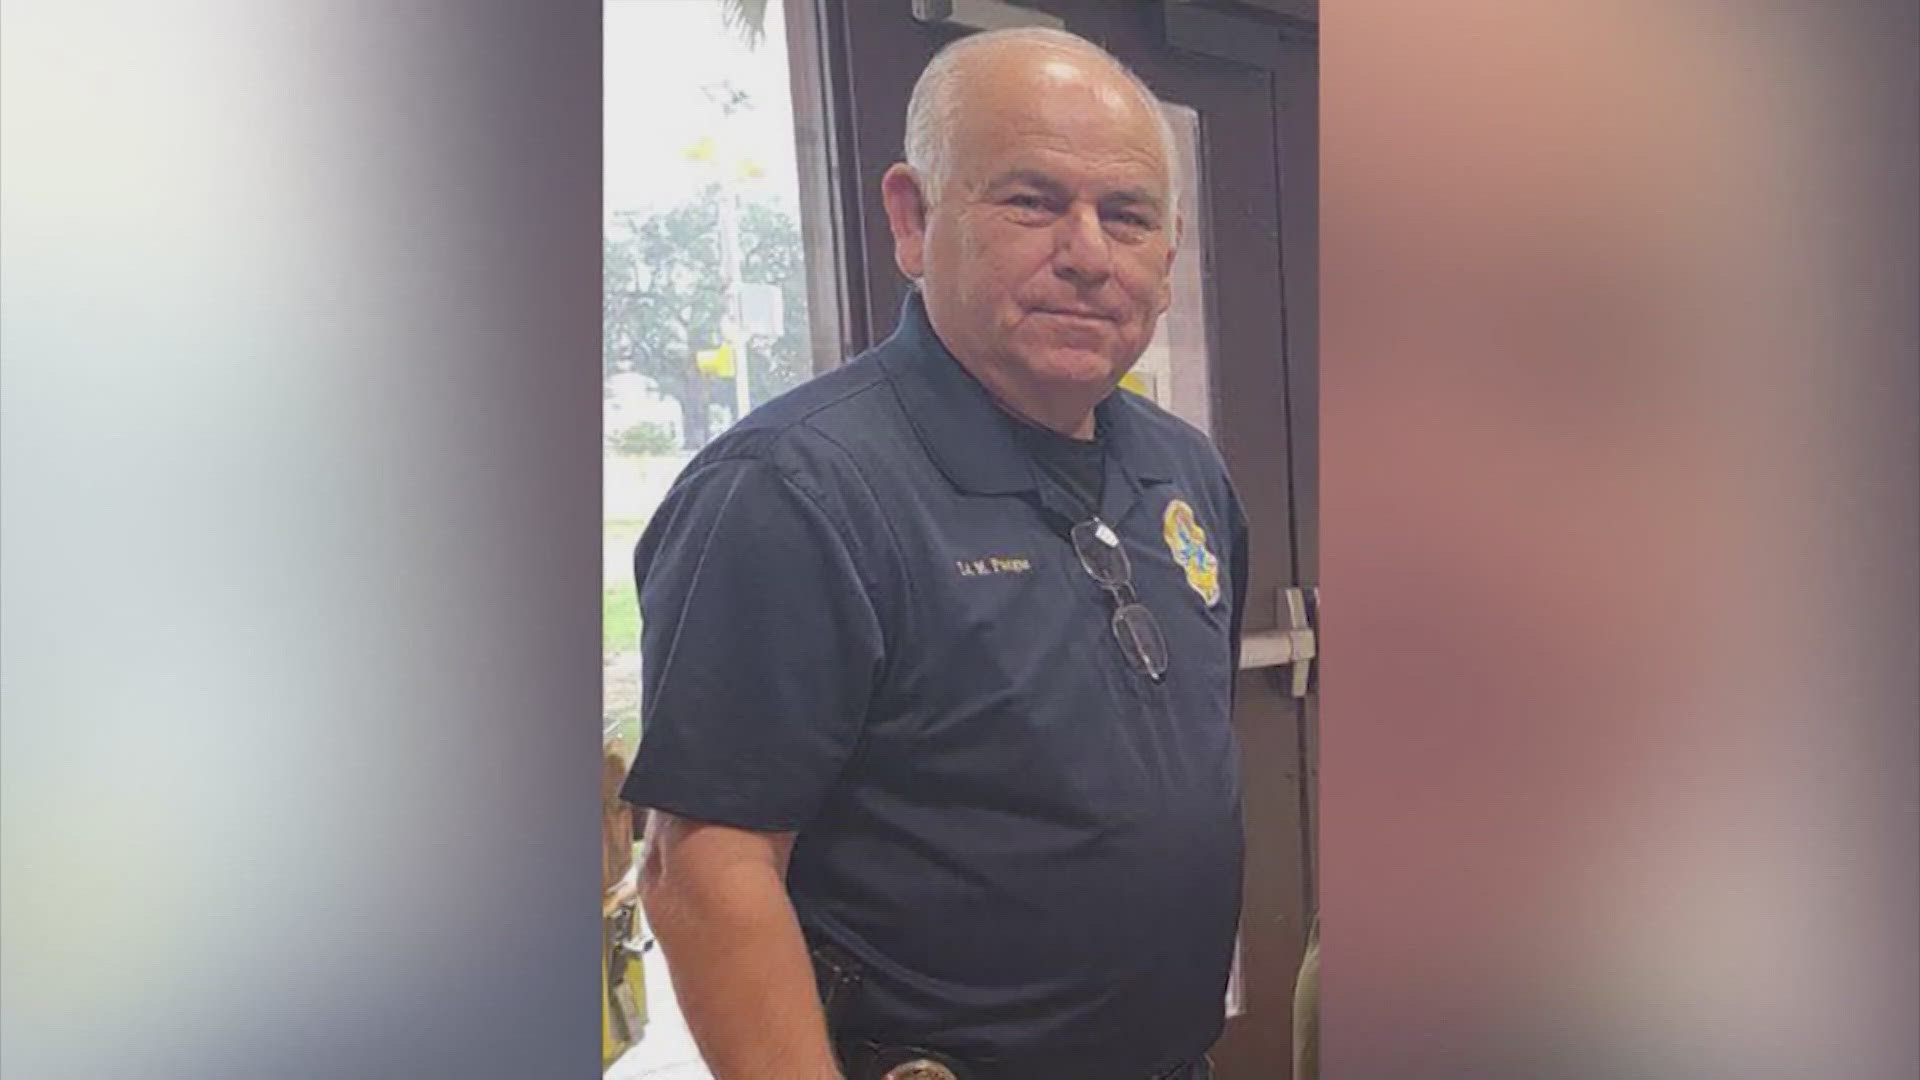 Mariano Pargas Jr. served as acting Uvalde police chief during the 2022 mass shooting and was determined to be most appropriate to take command of the scene.